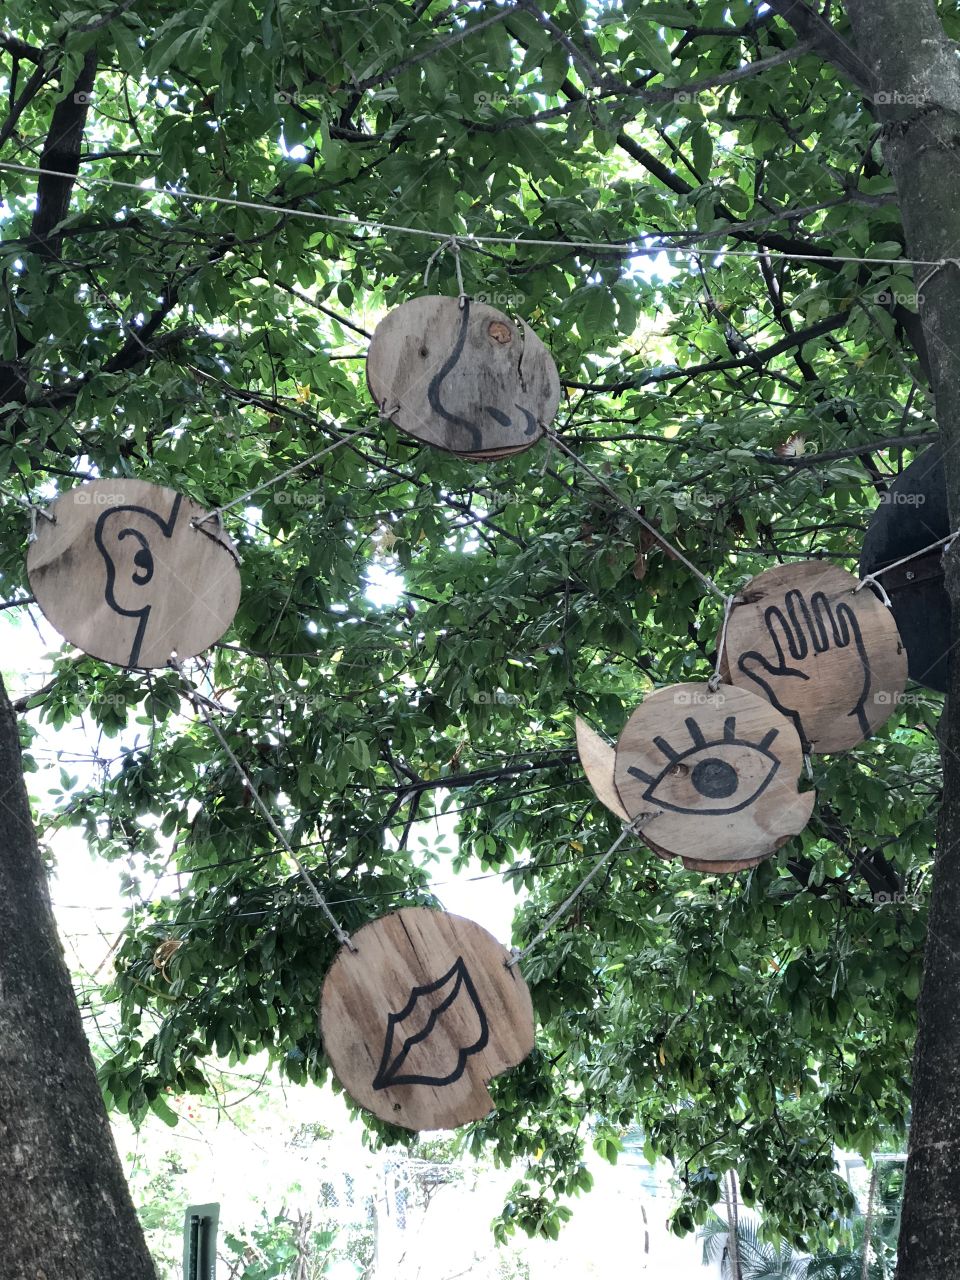 The five senses art being presented in a tree